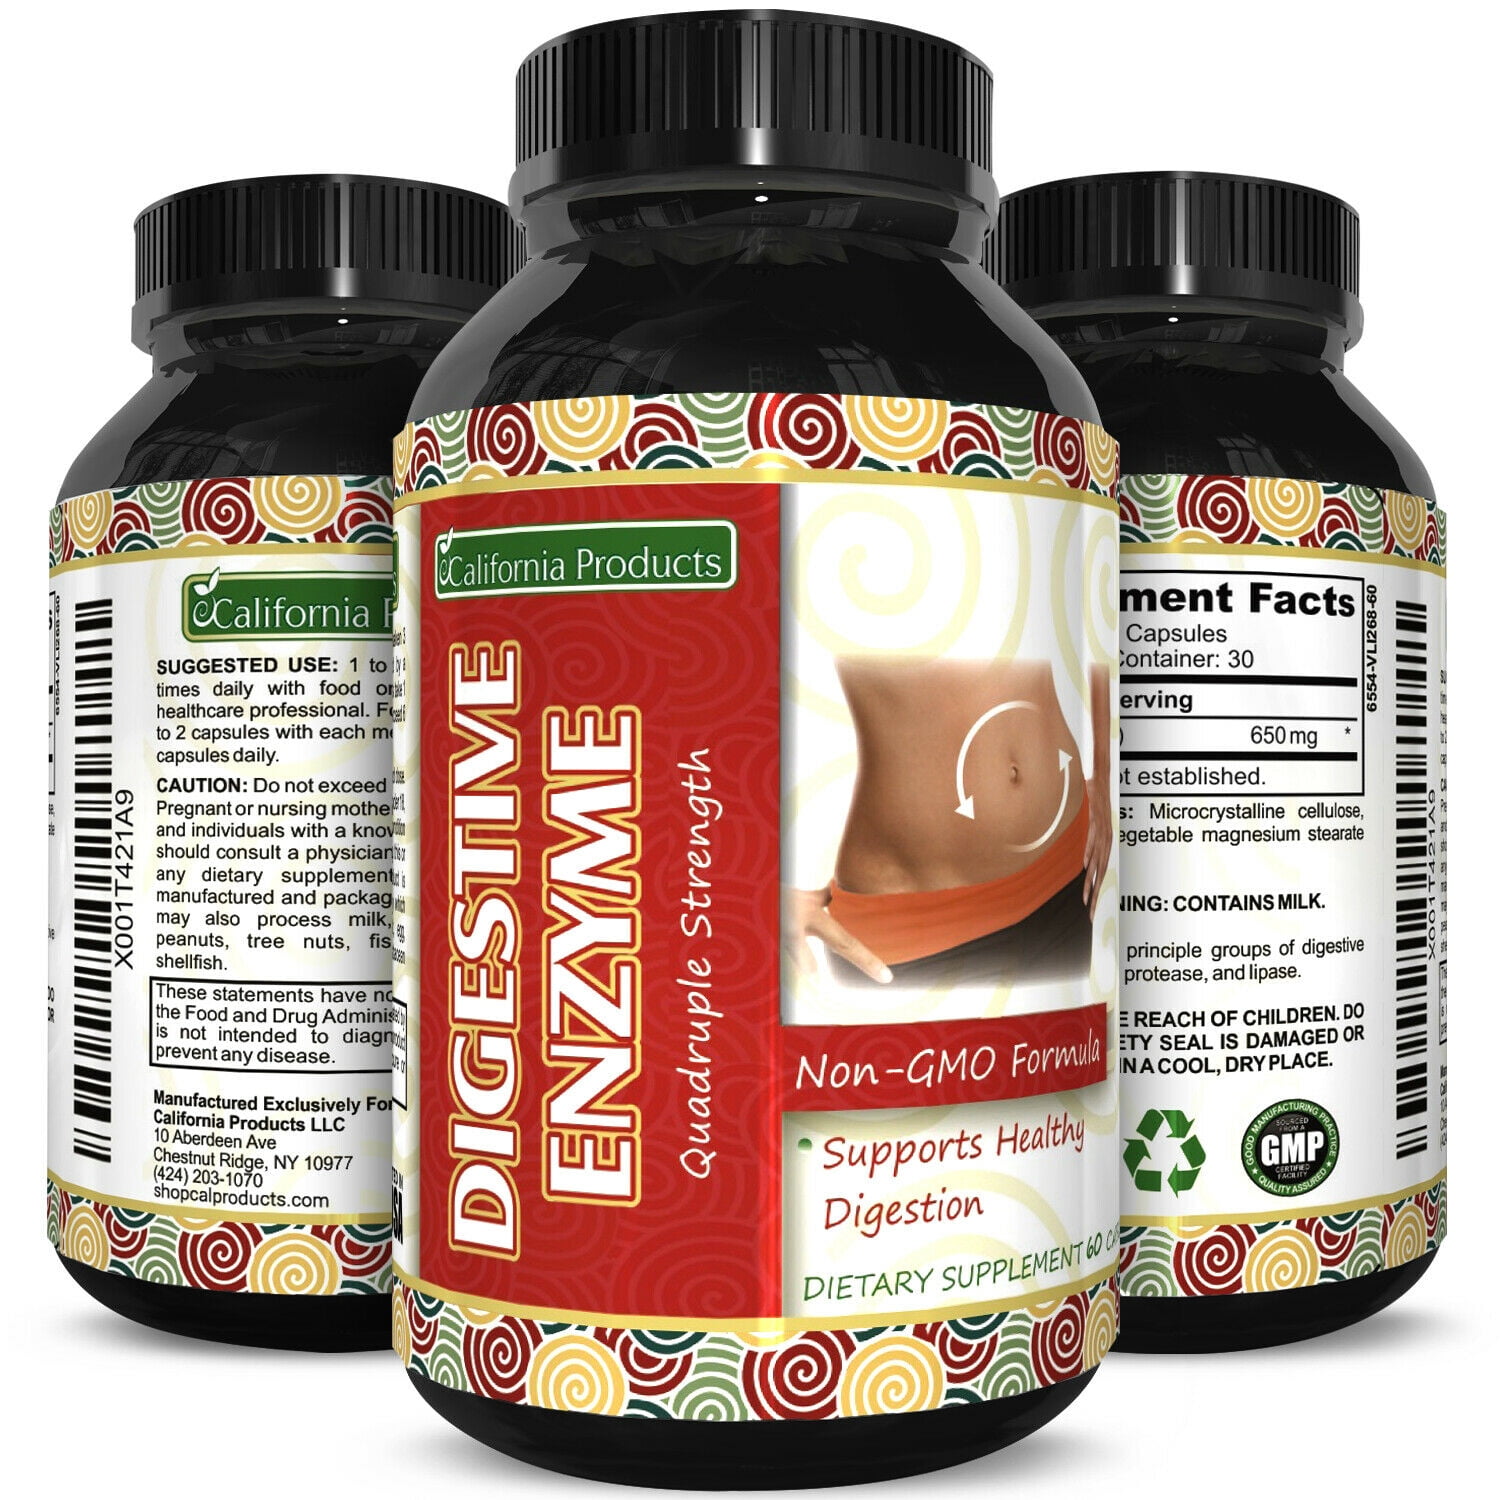 California Products Digestive Enzymes Pancreatin 4X